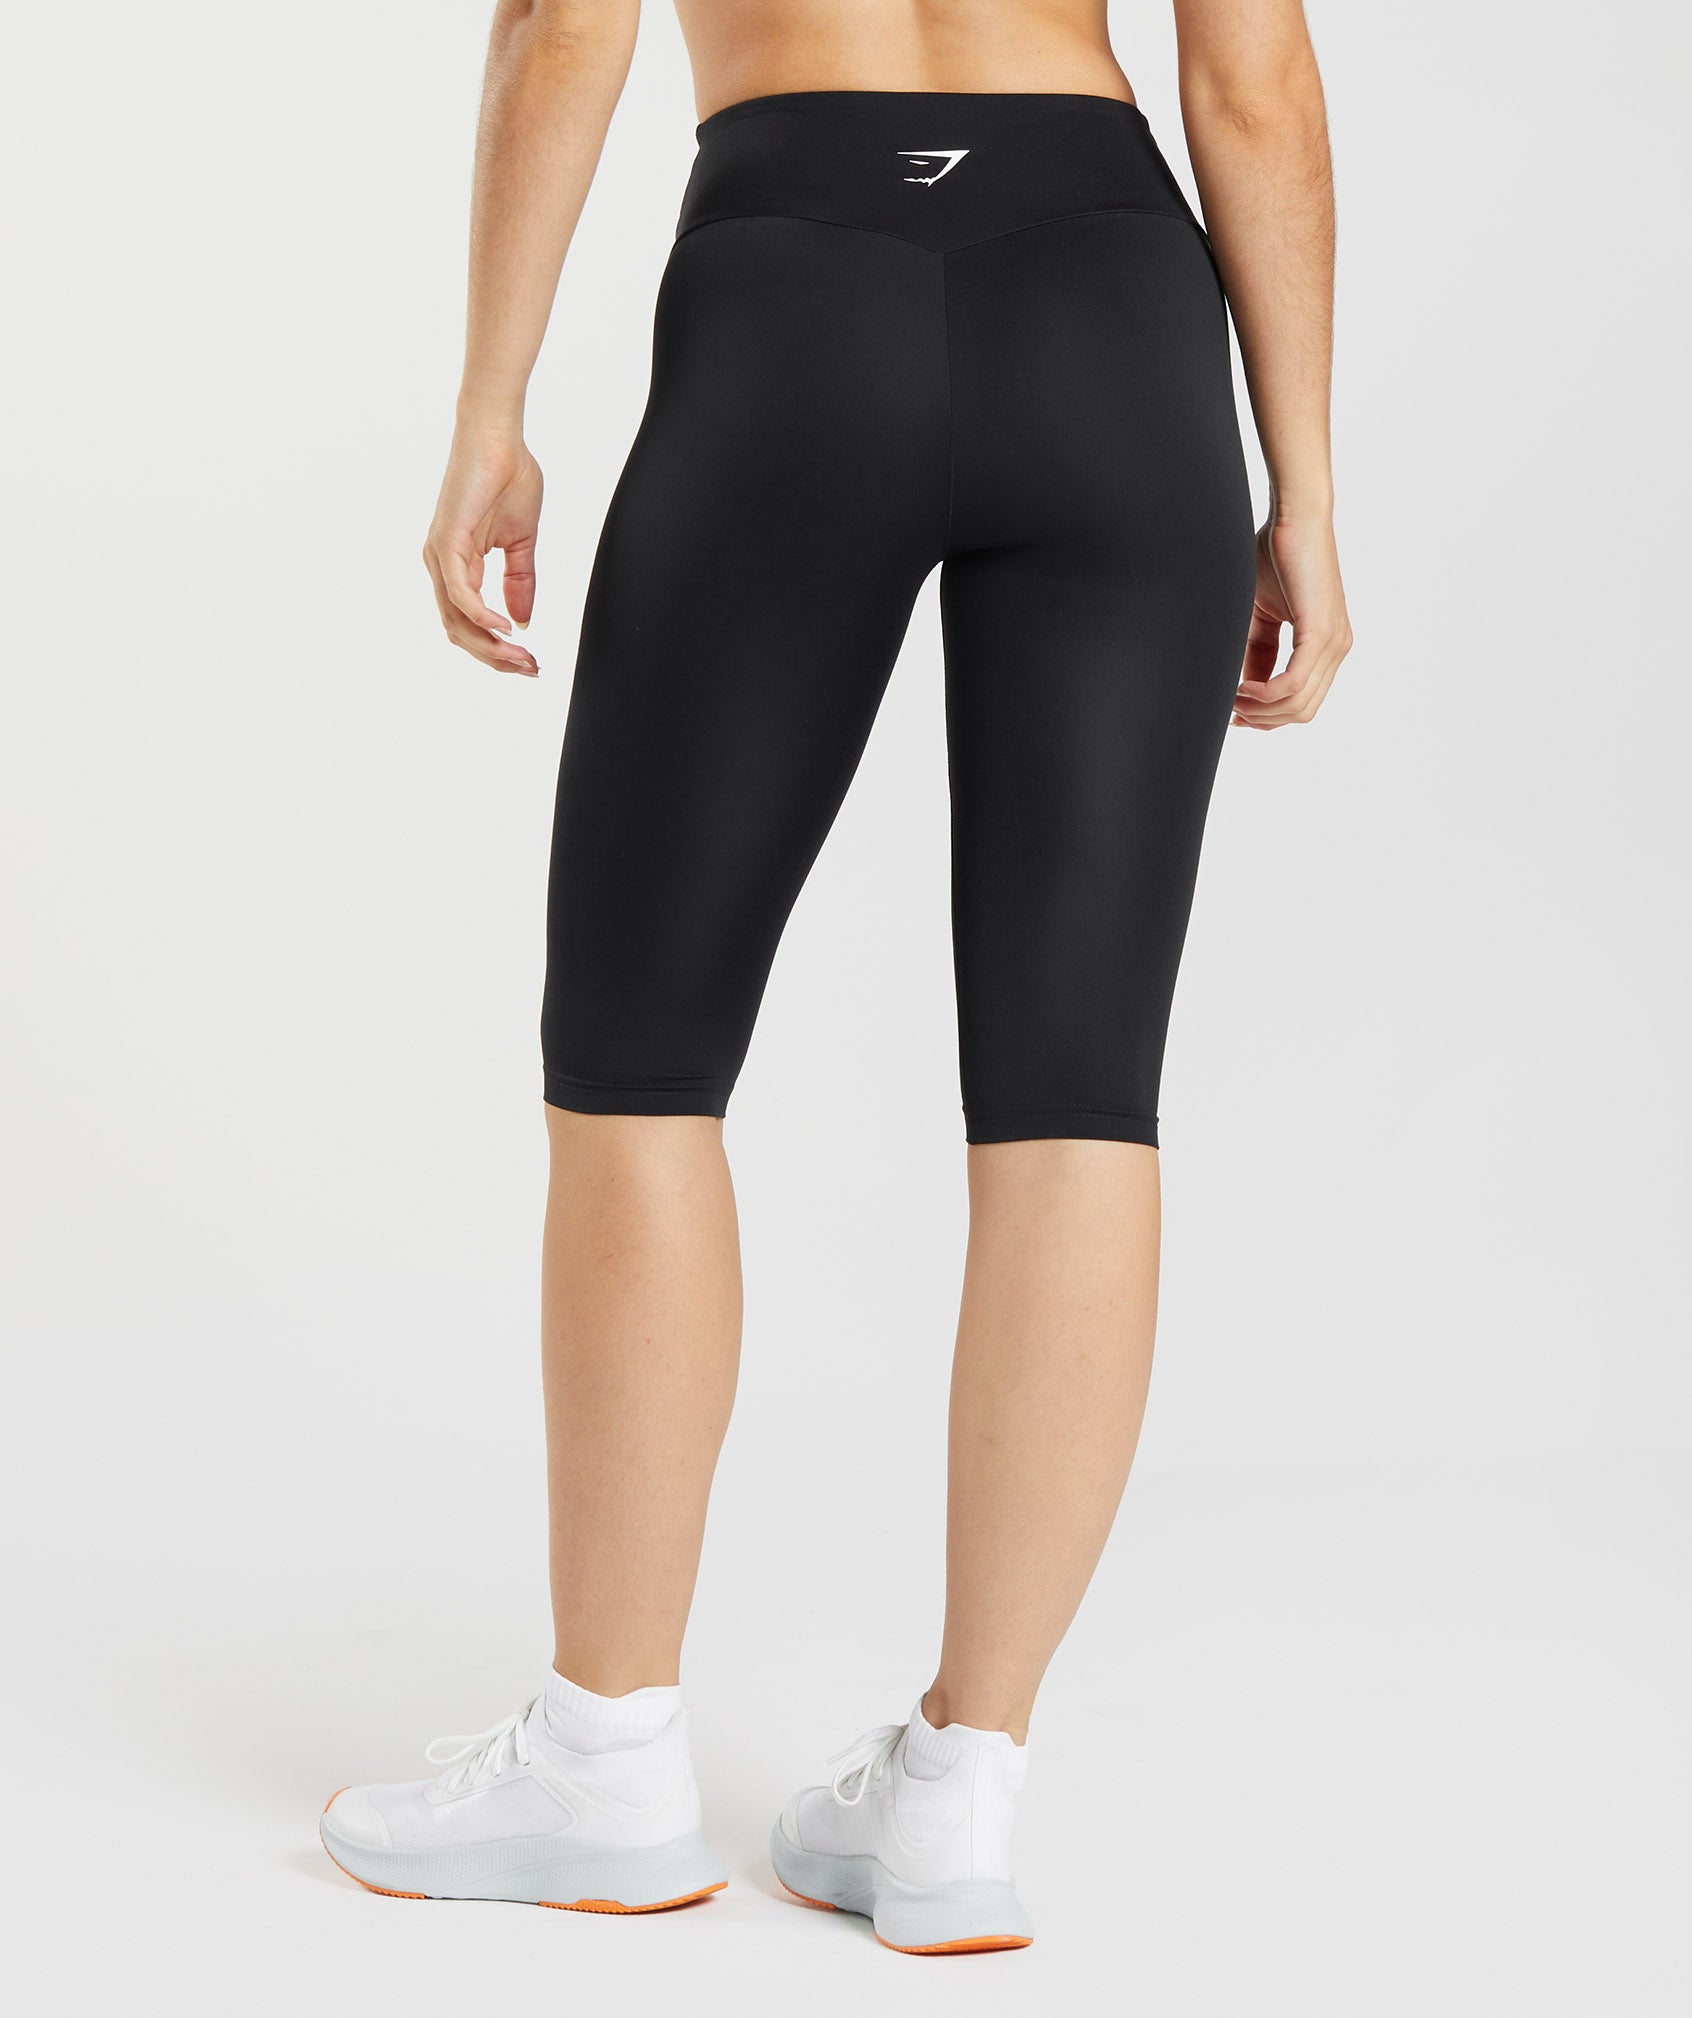 Gymshark Women's Clothing On Sale Up To 90% Off Retail